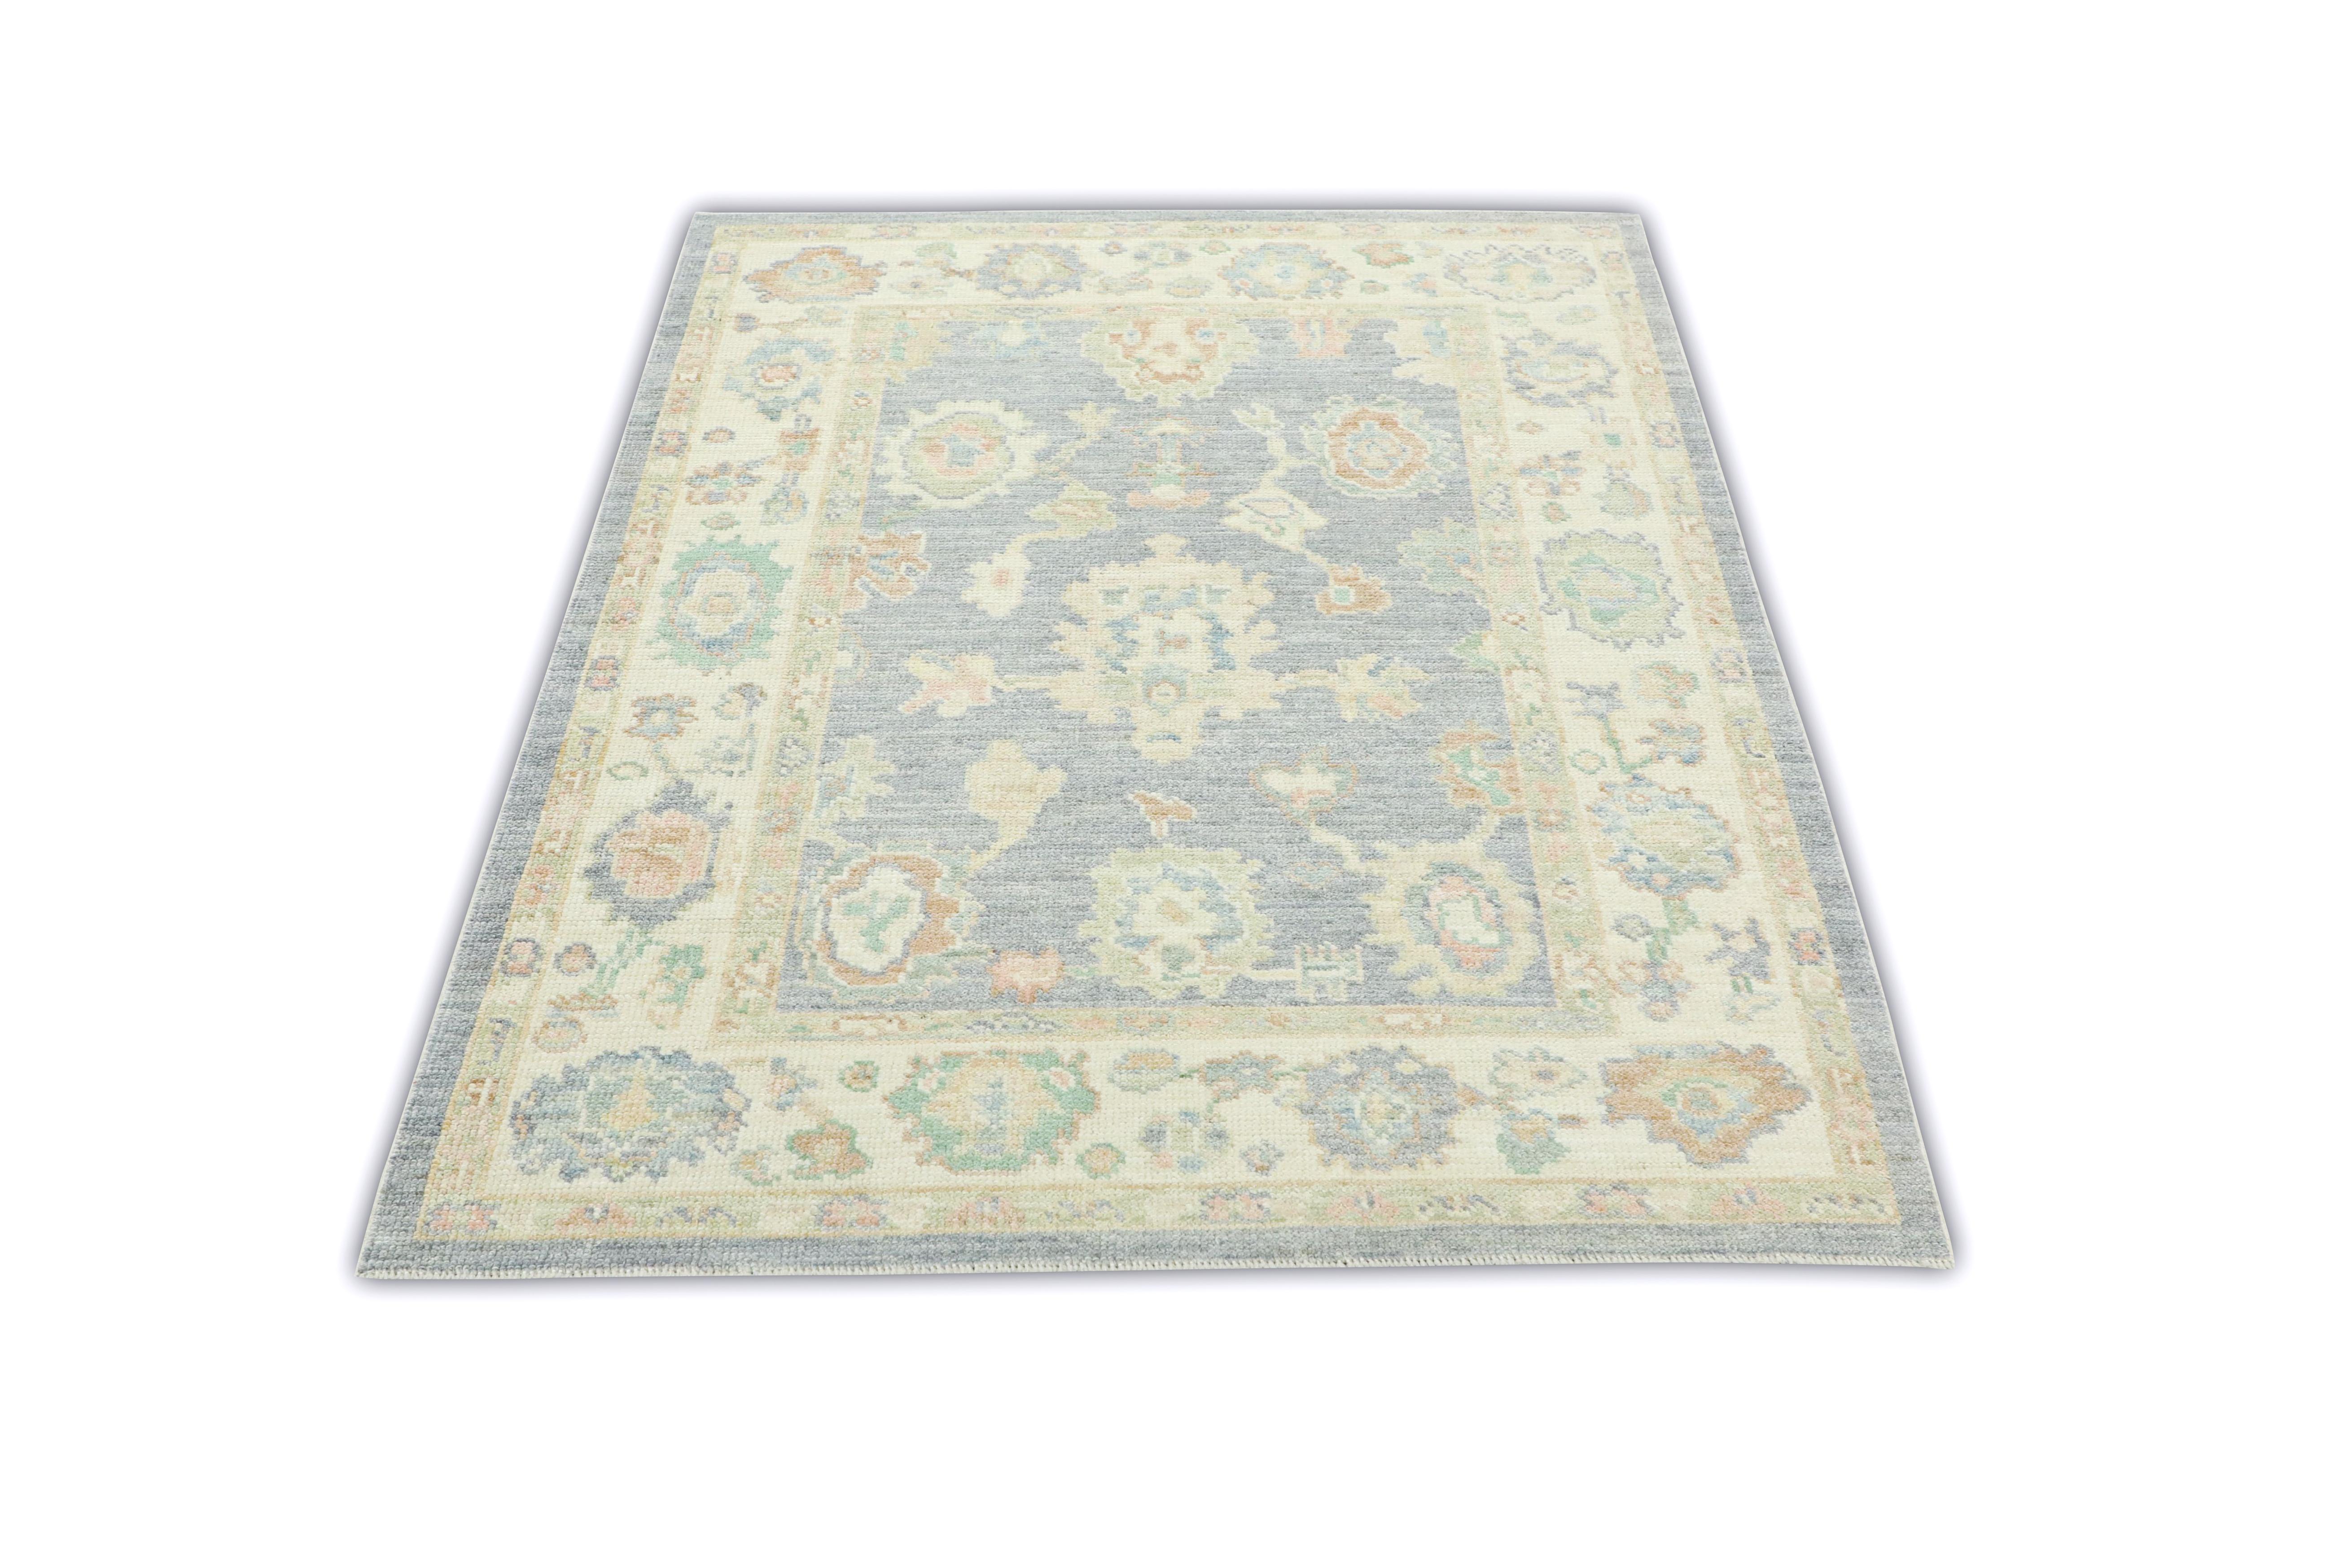 This Turkish oushak rug is a stunning piece of art that has been handwoven using traditional techniques by skilled artisans. The rug features intricate patterns and a soft color palette that is achieved through the use of natural vegetable dyes.